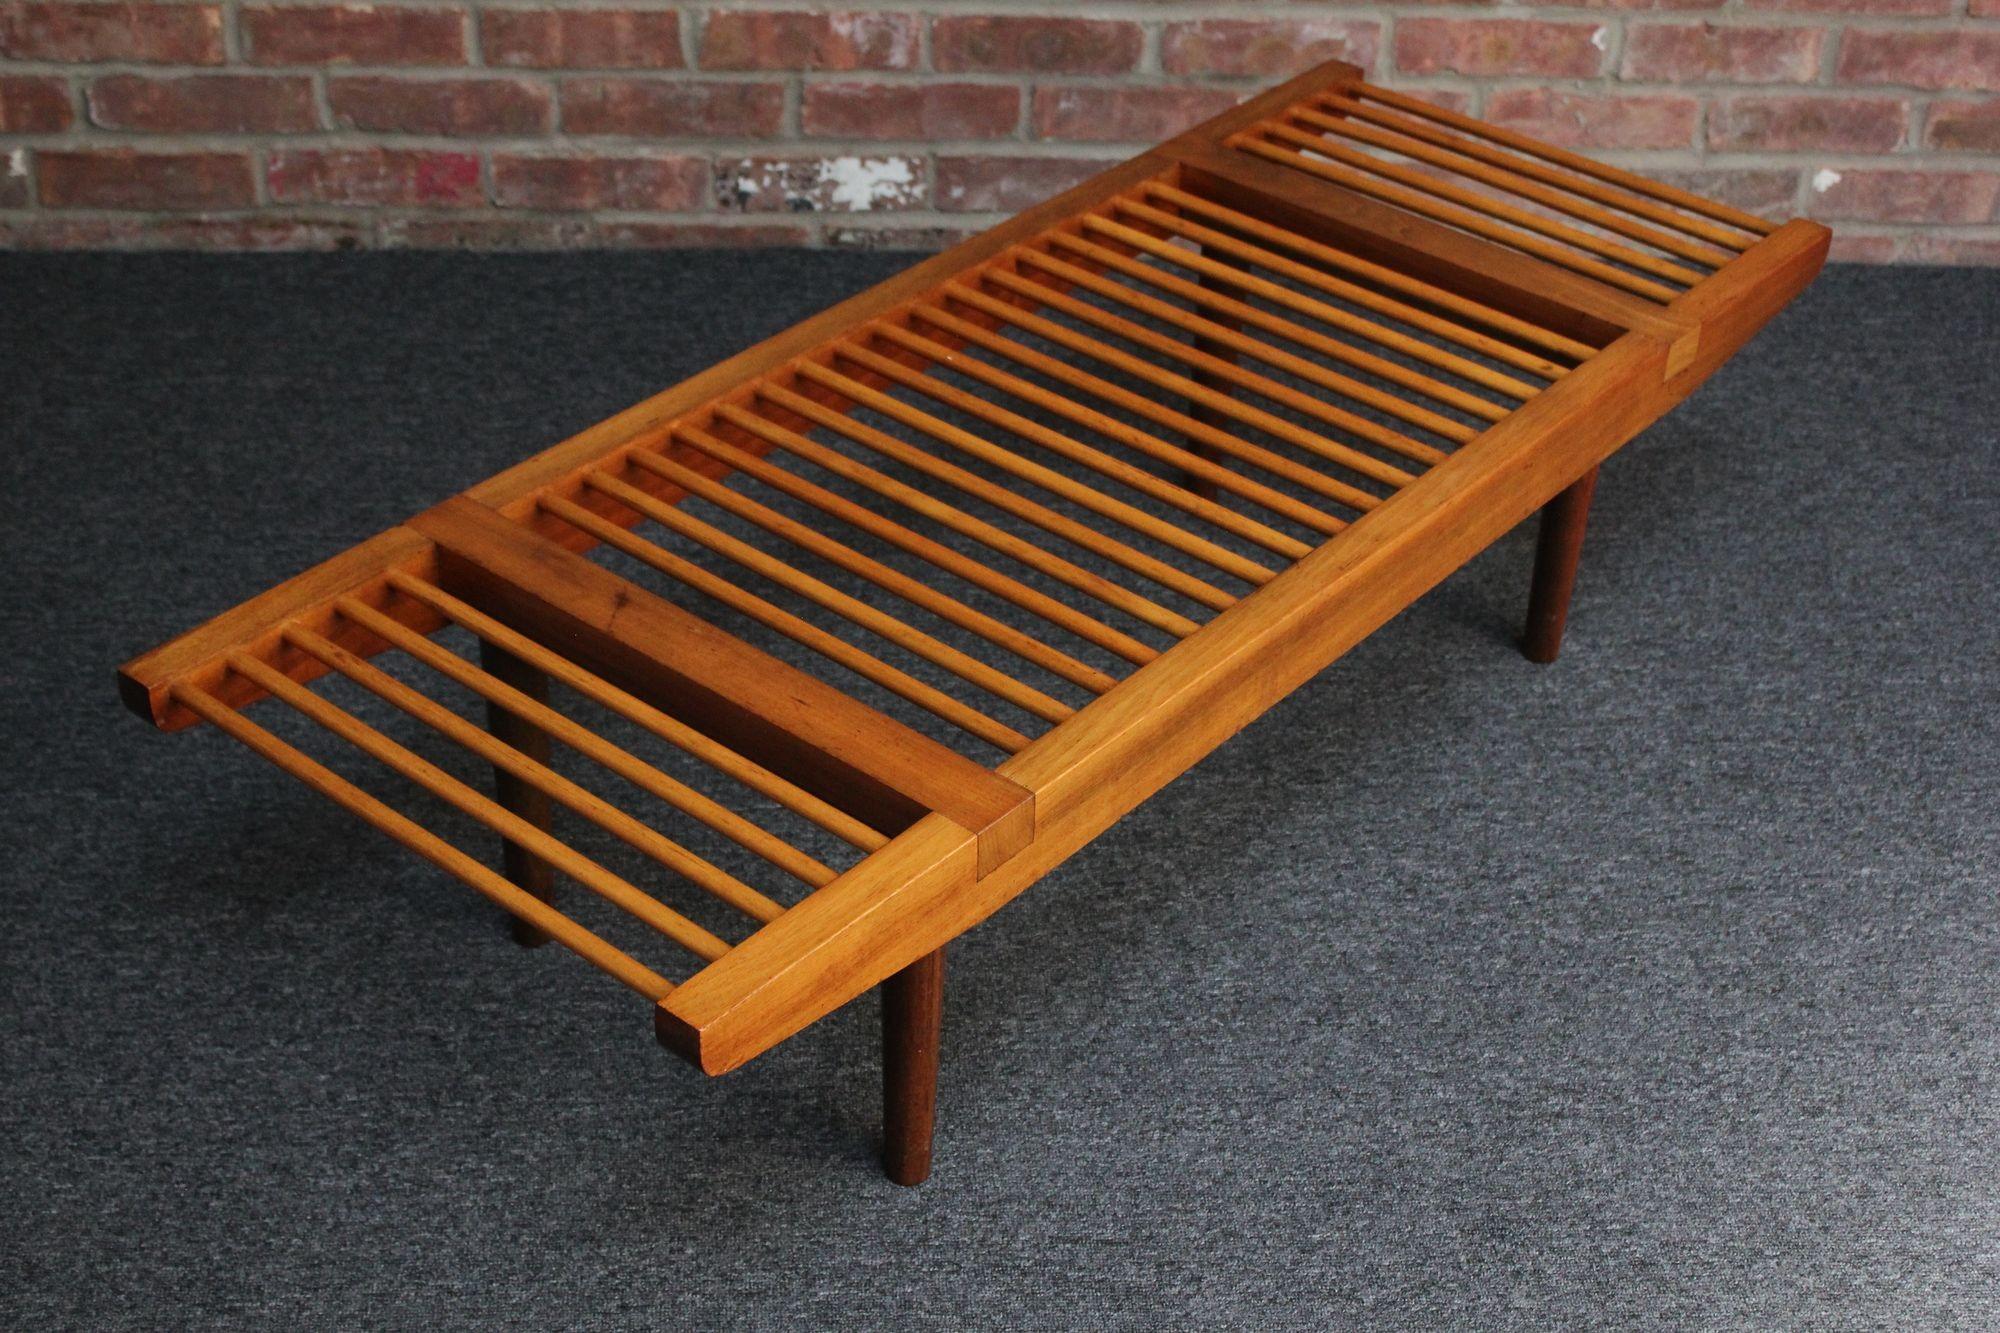 Short bench/coffee table designed by Milo Baughman for Glenn of California (ca. 1950s, USA). Composed of a gently tapered walnut frame and turned legs supported by two sets of spacers. Birch dowels create the slatted surface, adding a nice light